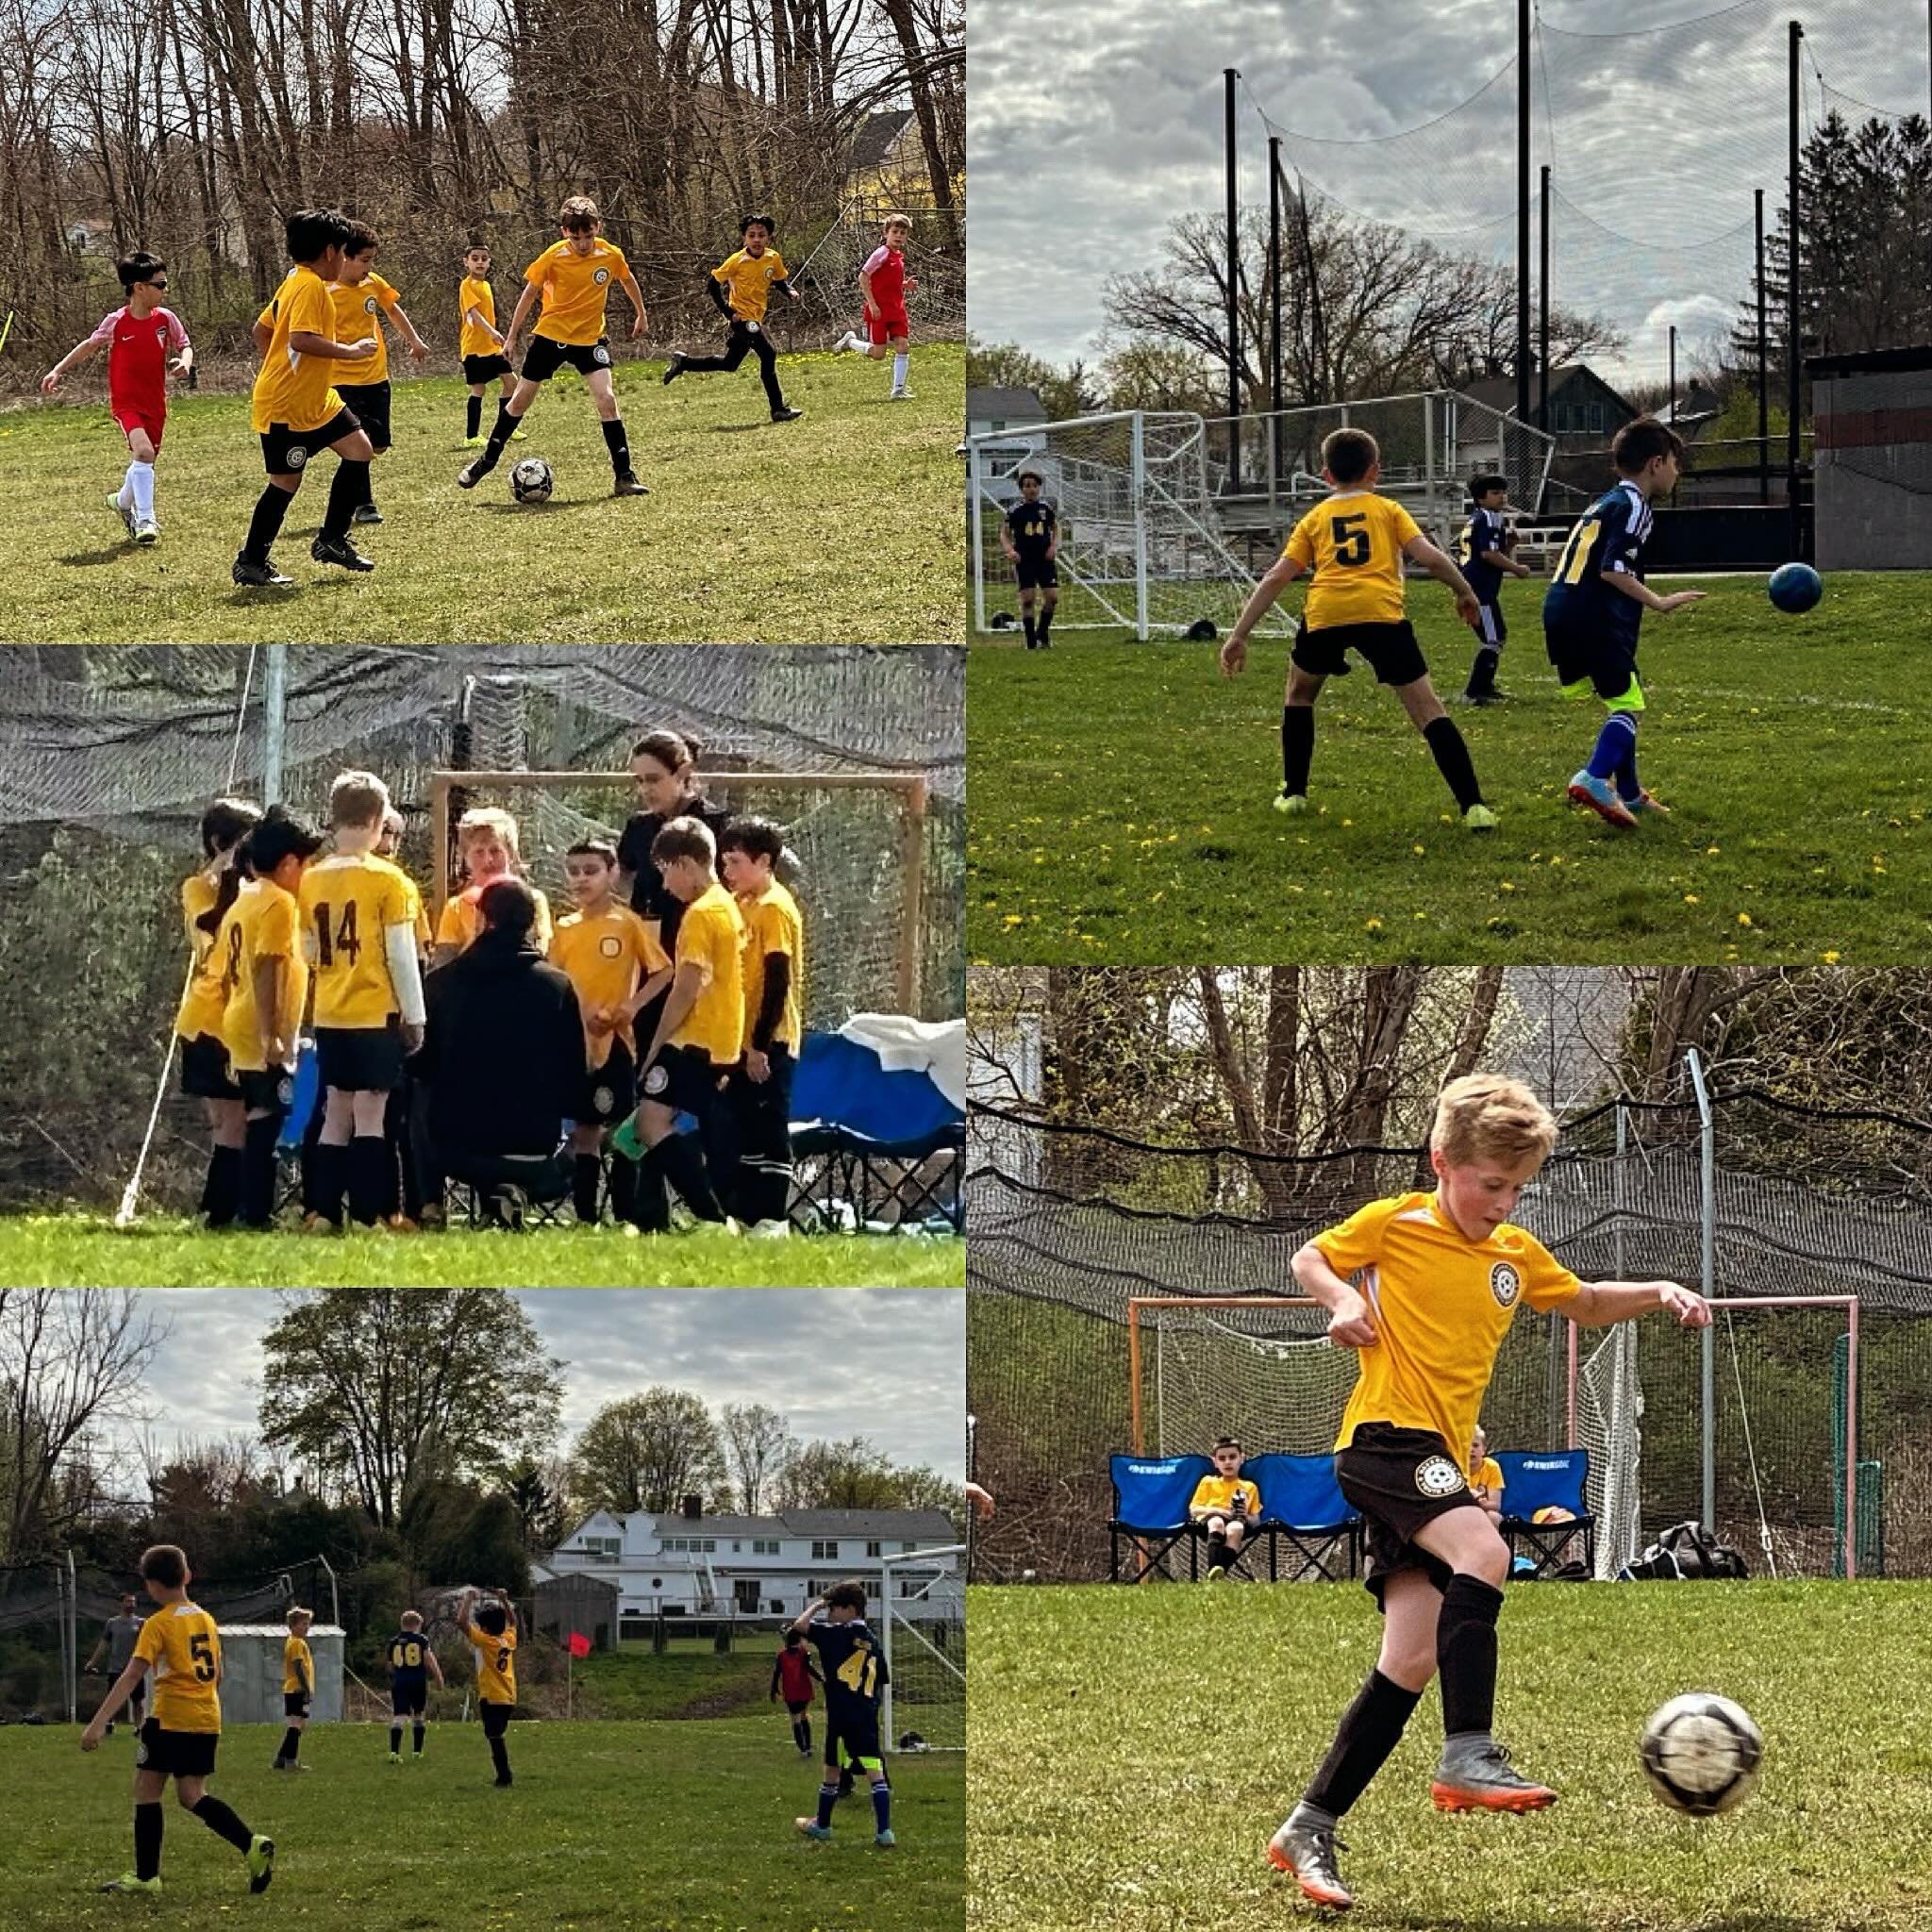 👏Cheers for the G4 Haverhill Hawks who are on a 2 game win streak! GO HAWKS! 
TRAVEL registration is open for the 24-25 season! Fall 2024 entering grade 3 through grade 8. 
For more information visit: 
www.haverhillyouthsoccer.org/travel
Register he